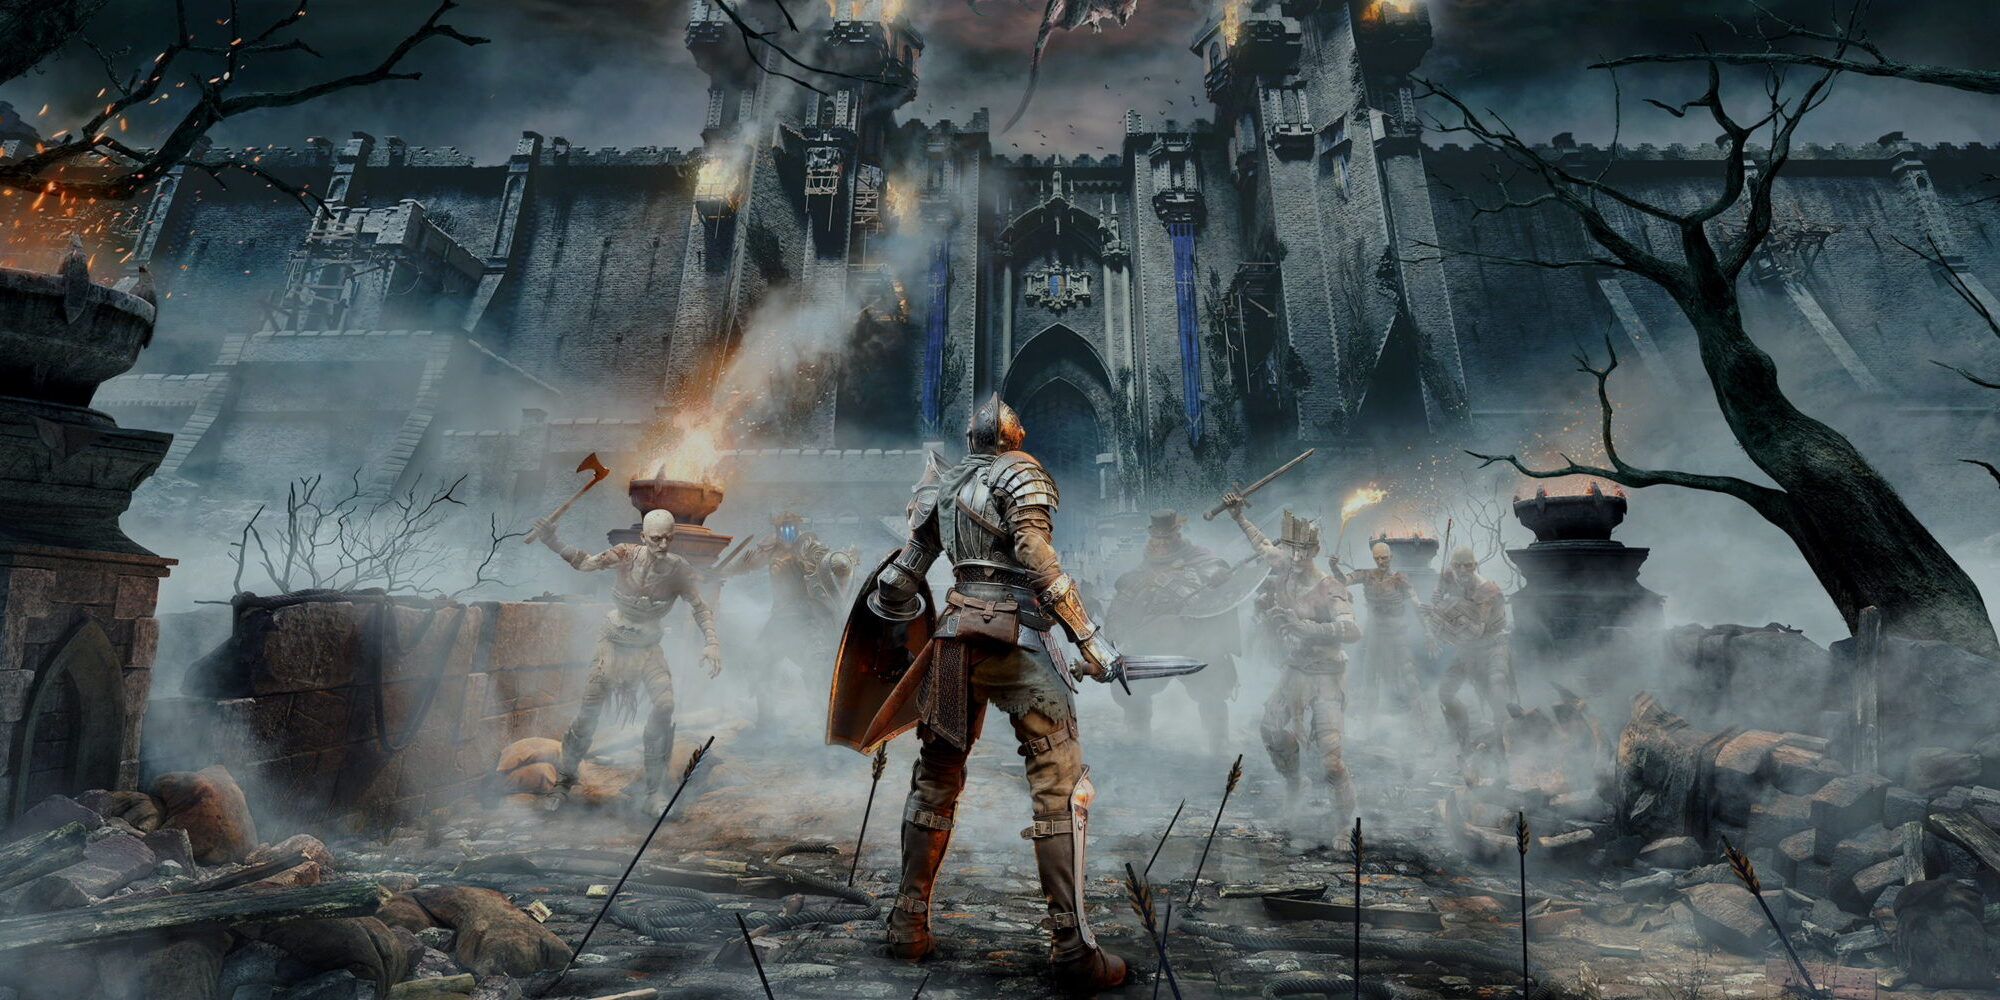 A Demon's Souls player stands at the base of a castle while zombies charge at him